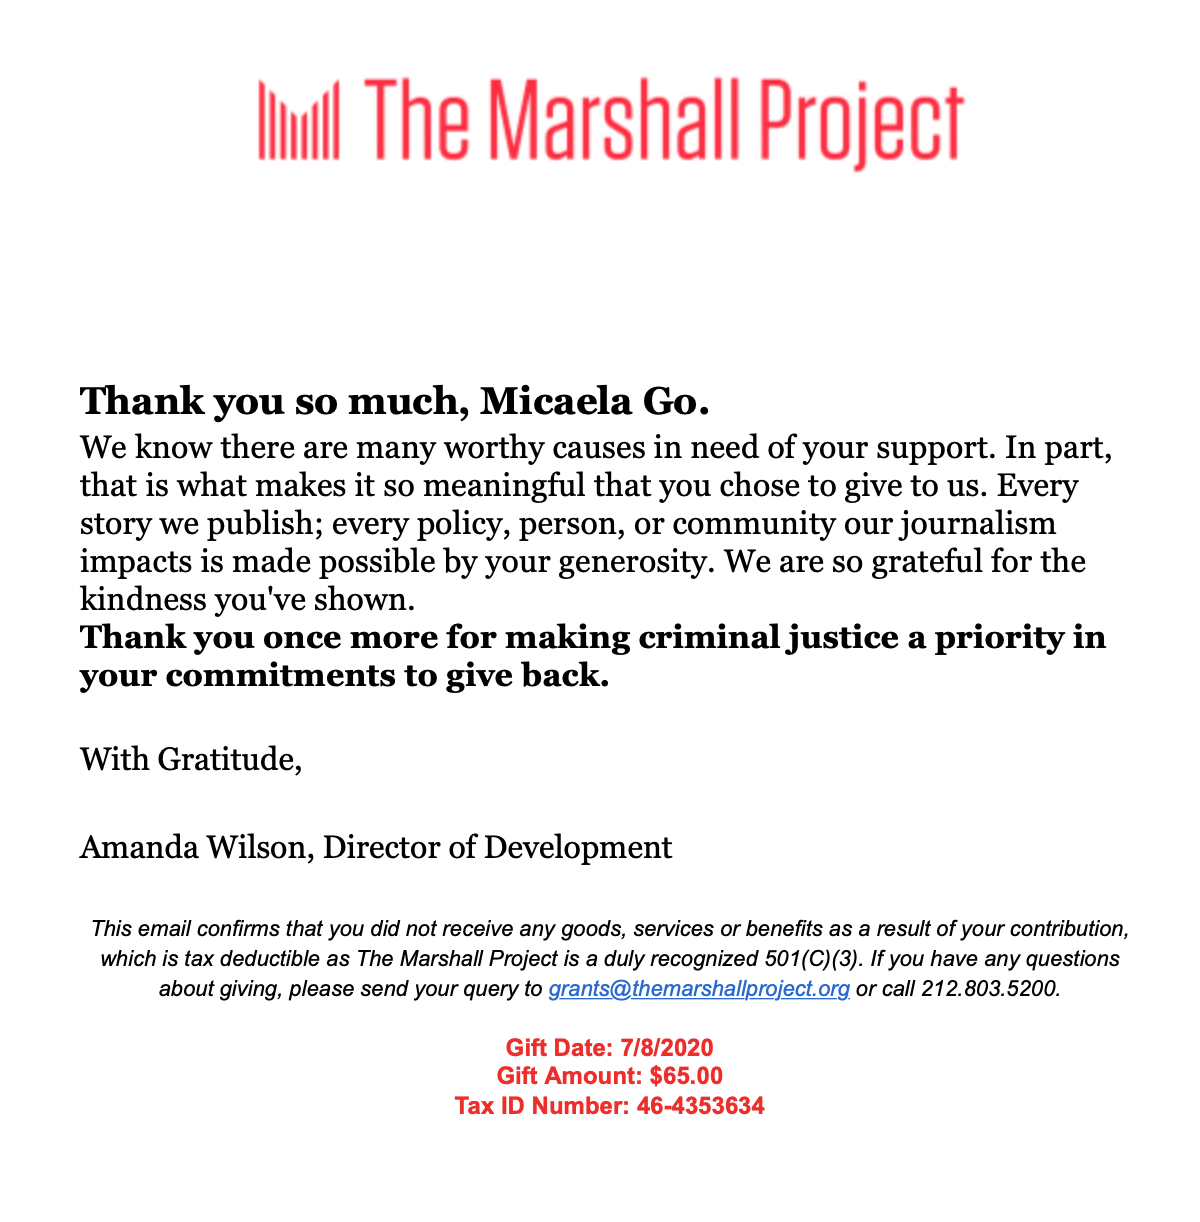 20200707_Donation1.png